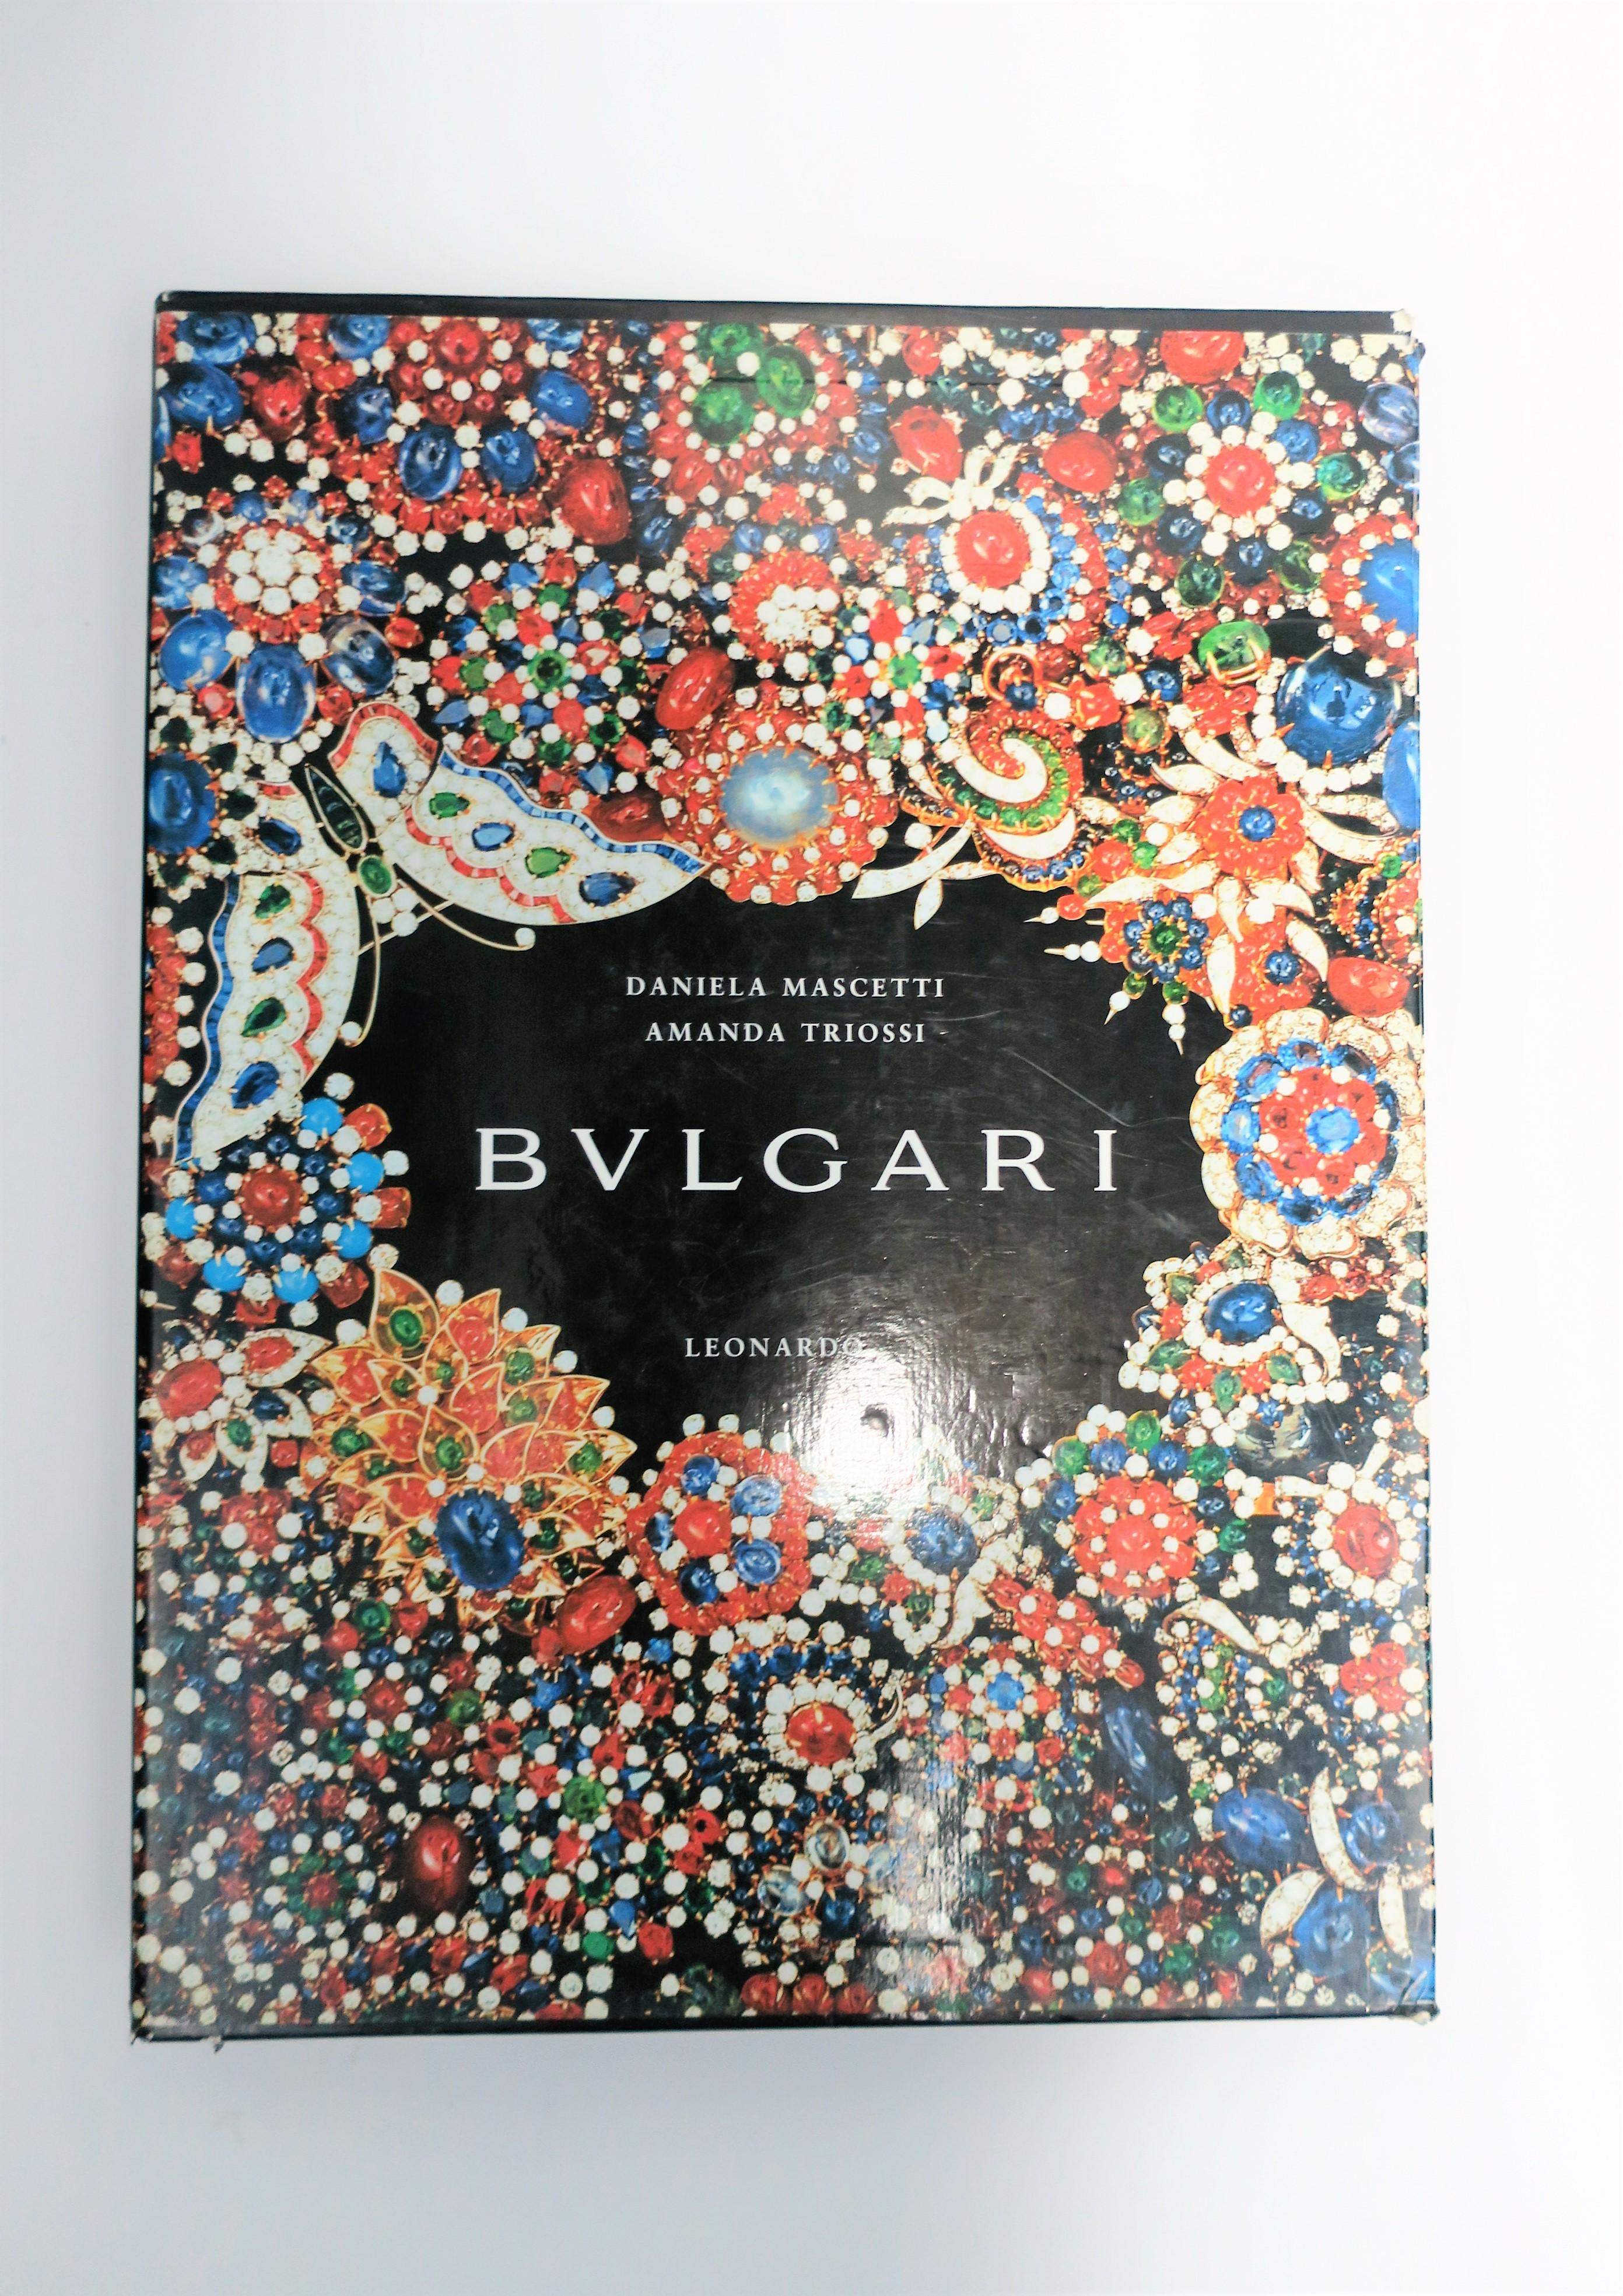 This is a beautiful coffee table (or library book) about the history of the iconic Italian luxury jeweler Bvlgari (or Bulgari), circa 1990s, Italy. Book covers Bulgari's history in creating iconic gorgeous jewelry and its connection, globally, to